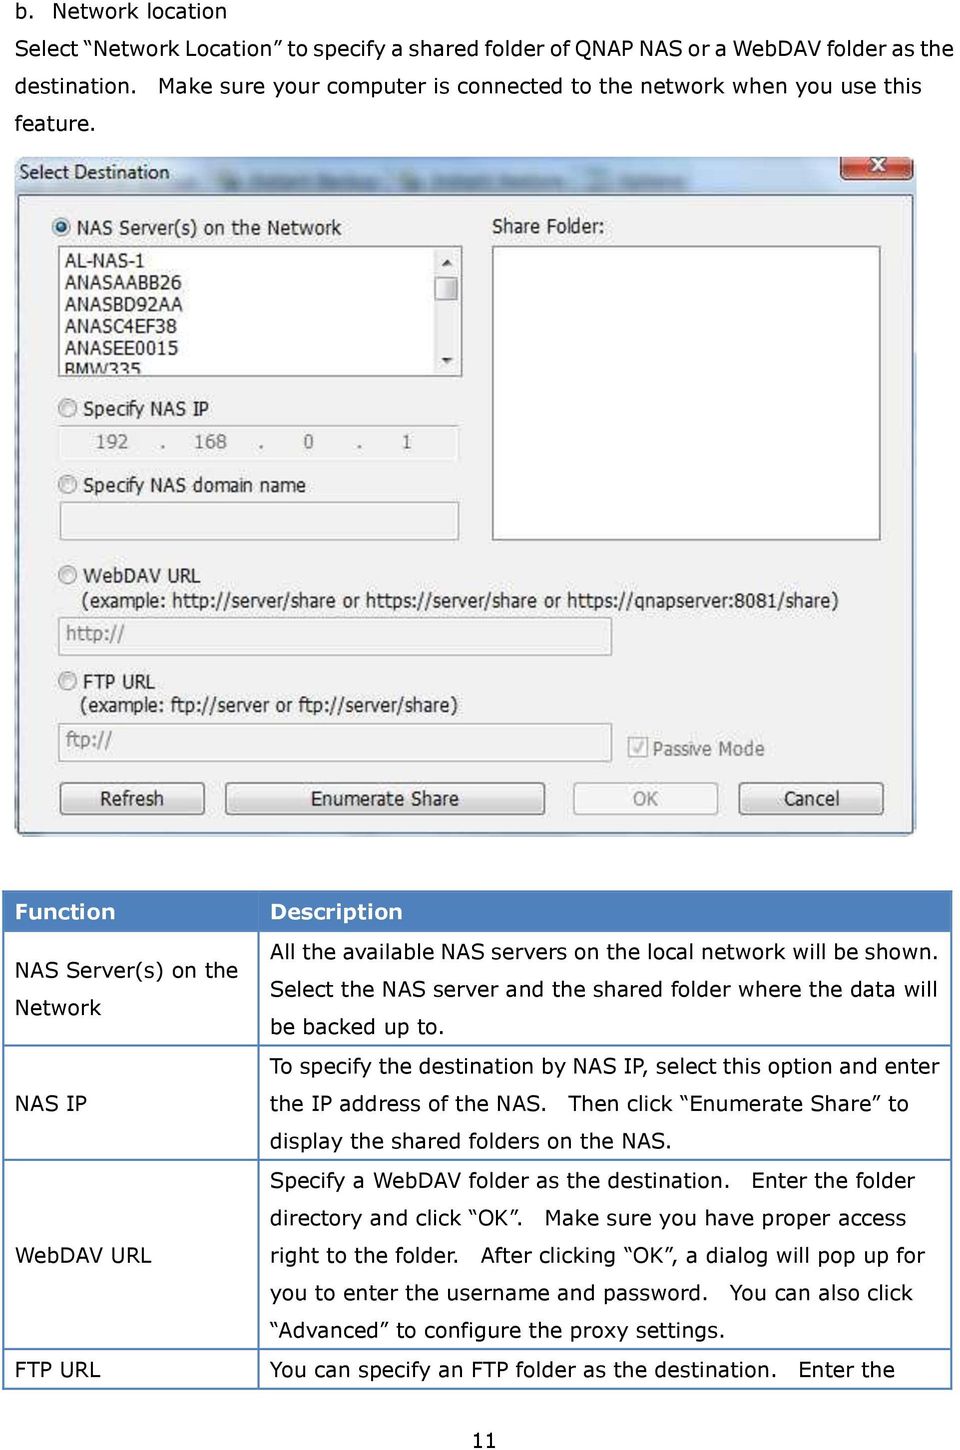 Select the NAS server and the shared folder where the data will be backed up to. To specify the destination by NAS IP, select this option and enter the IP address of the NAS.